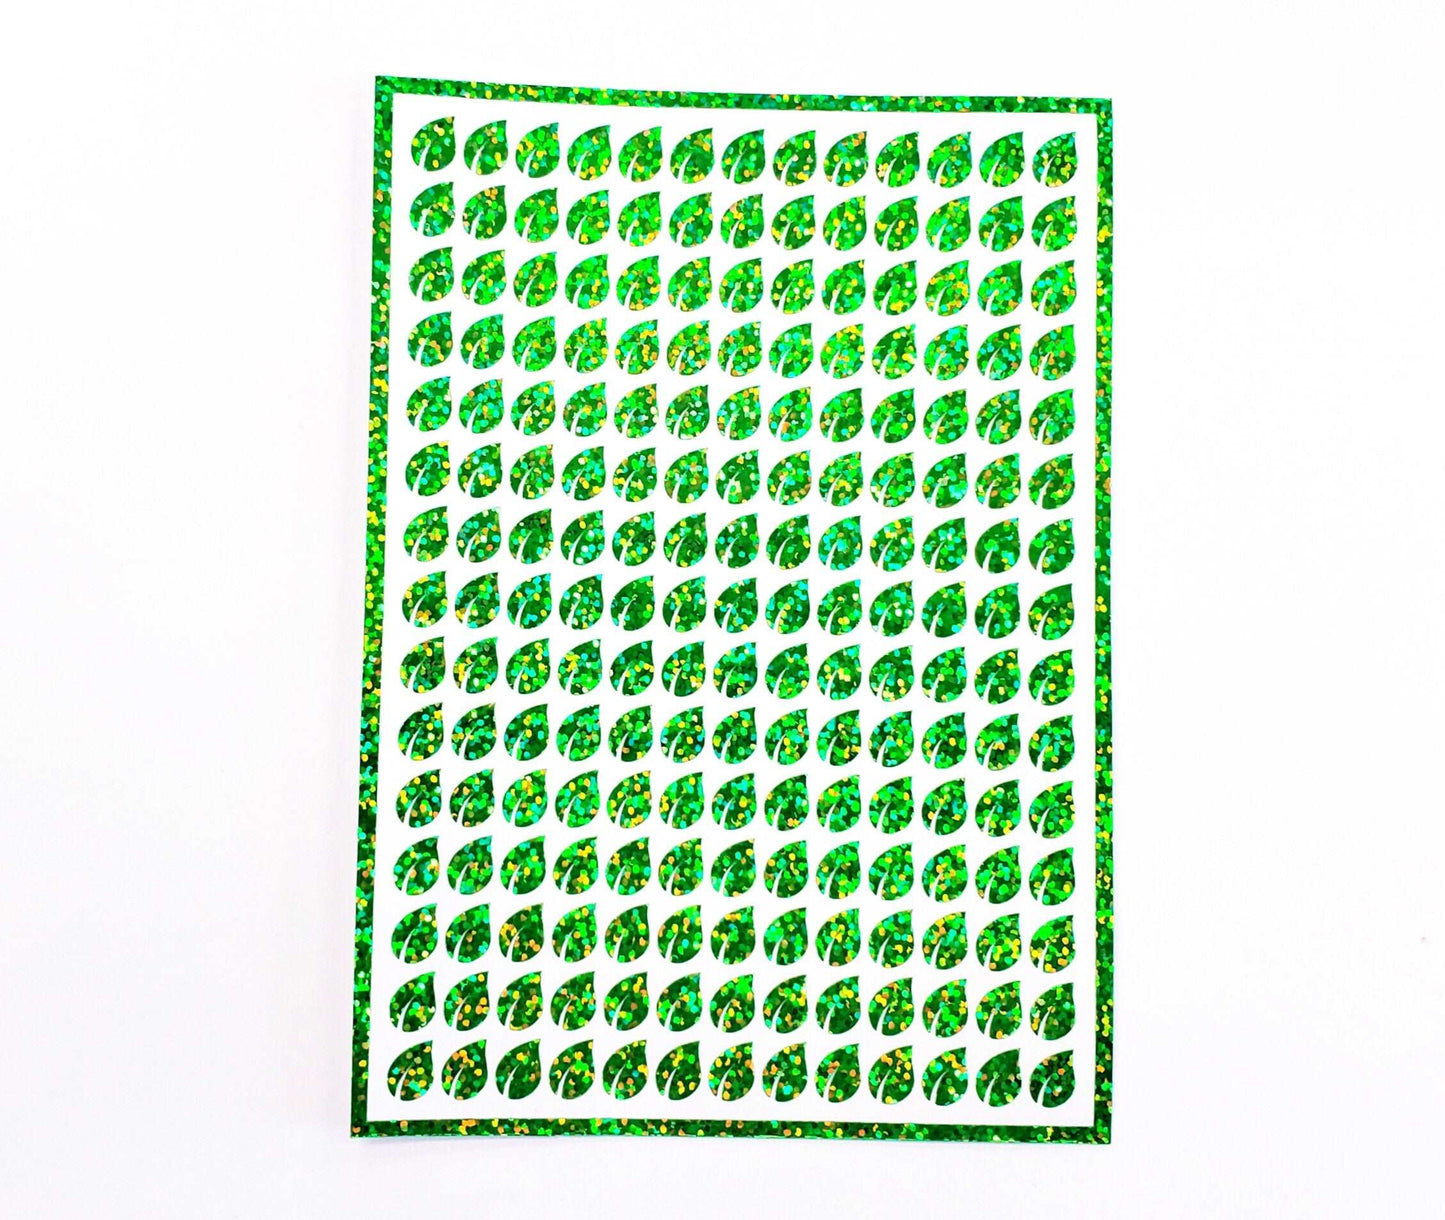 Leaf Mini Stickies, set of 195 sparkly bright green tiny leaf decals.